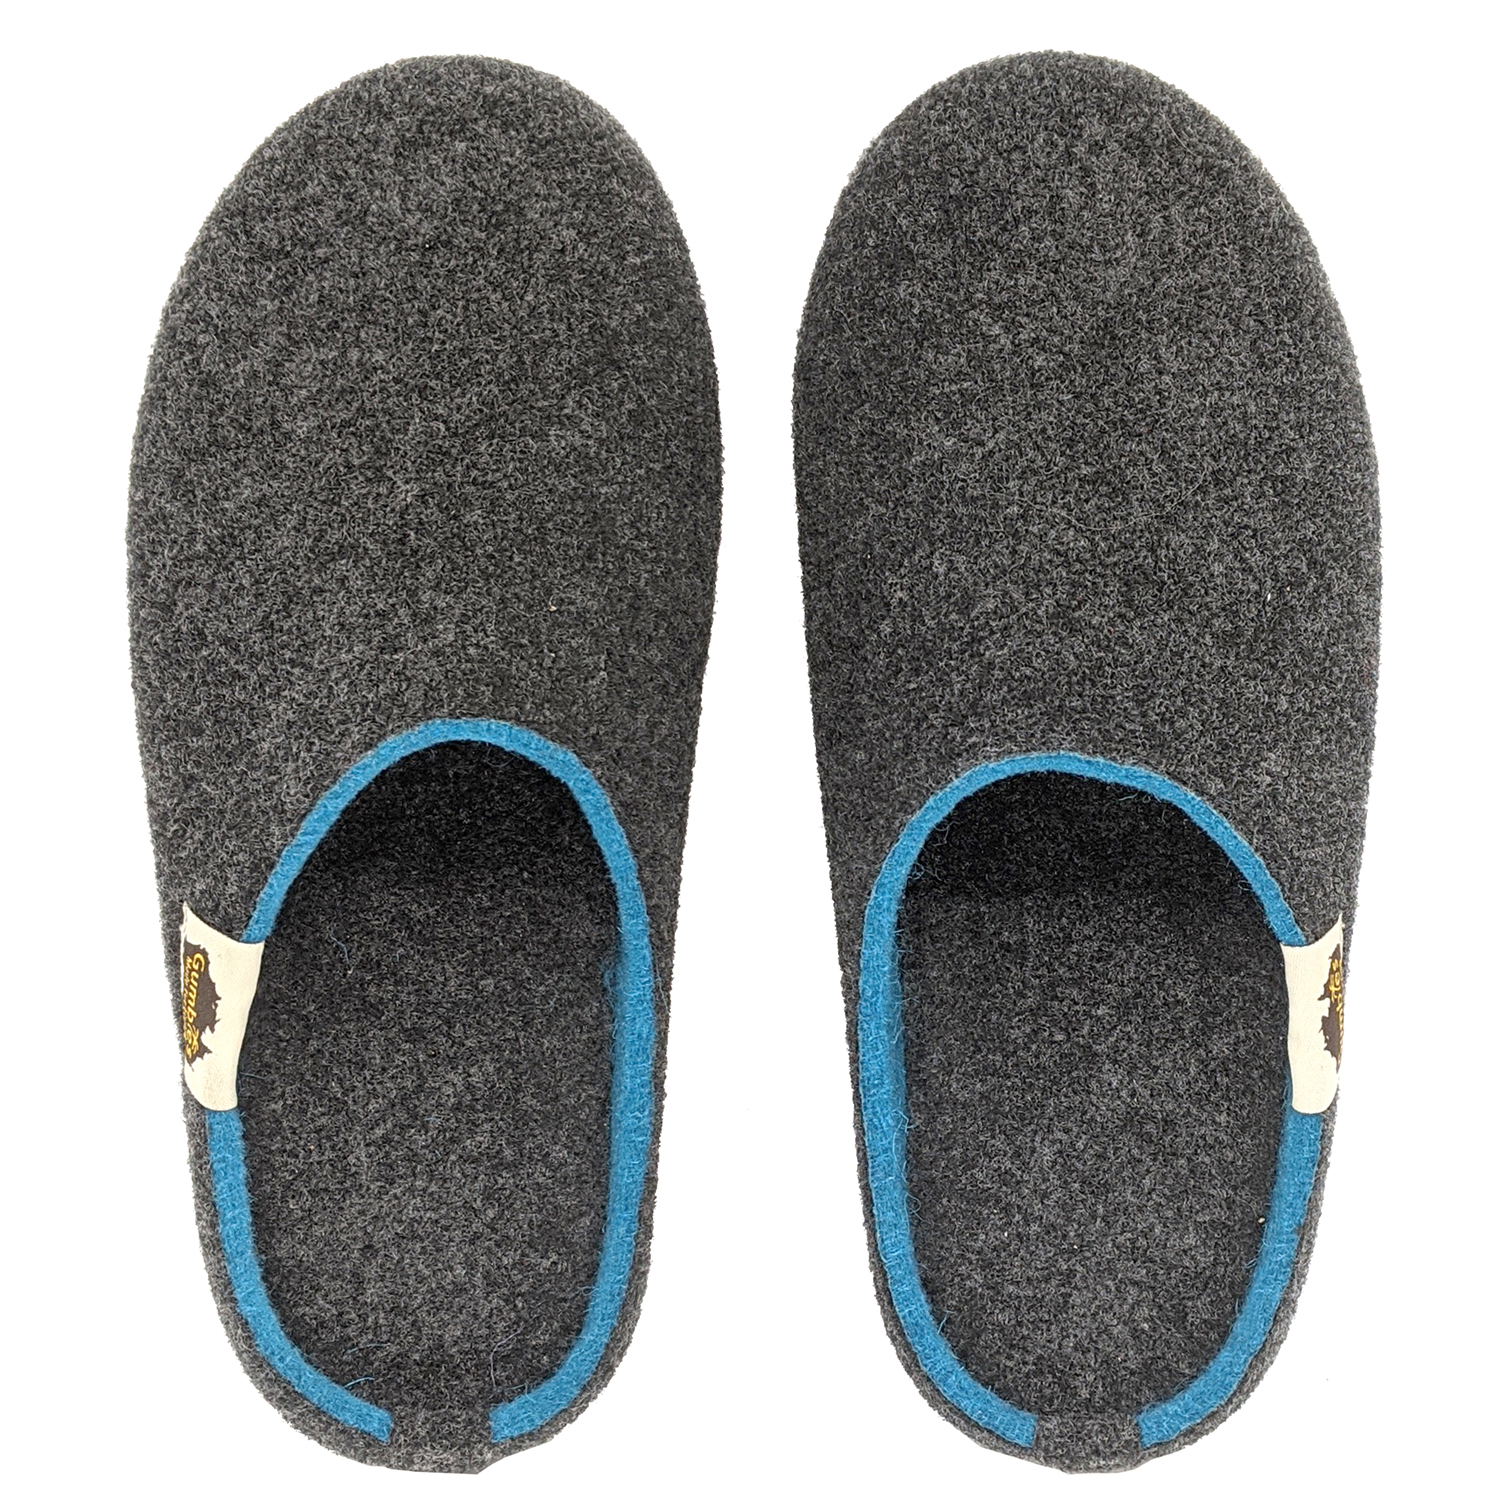 Gumbies Outback Slipper, charcoal/turquoise